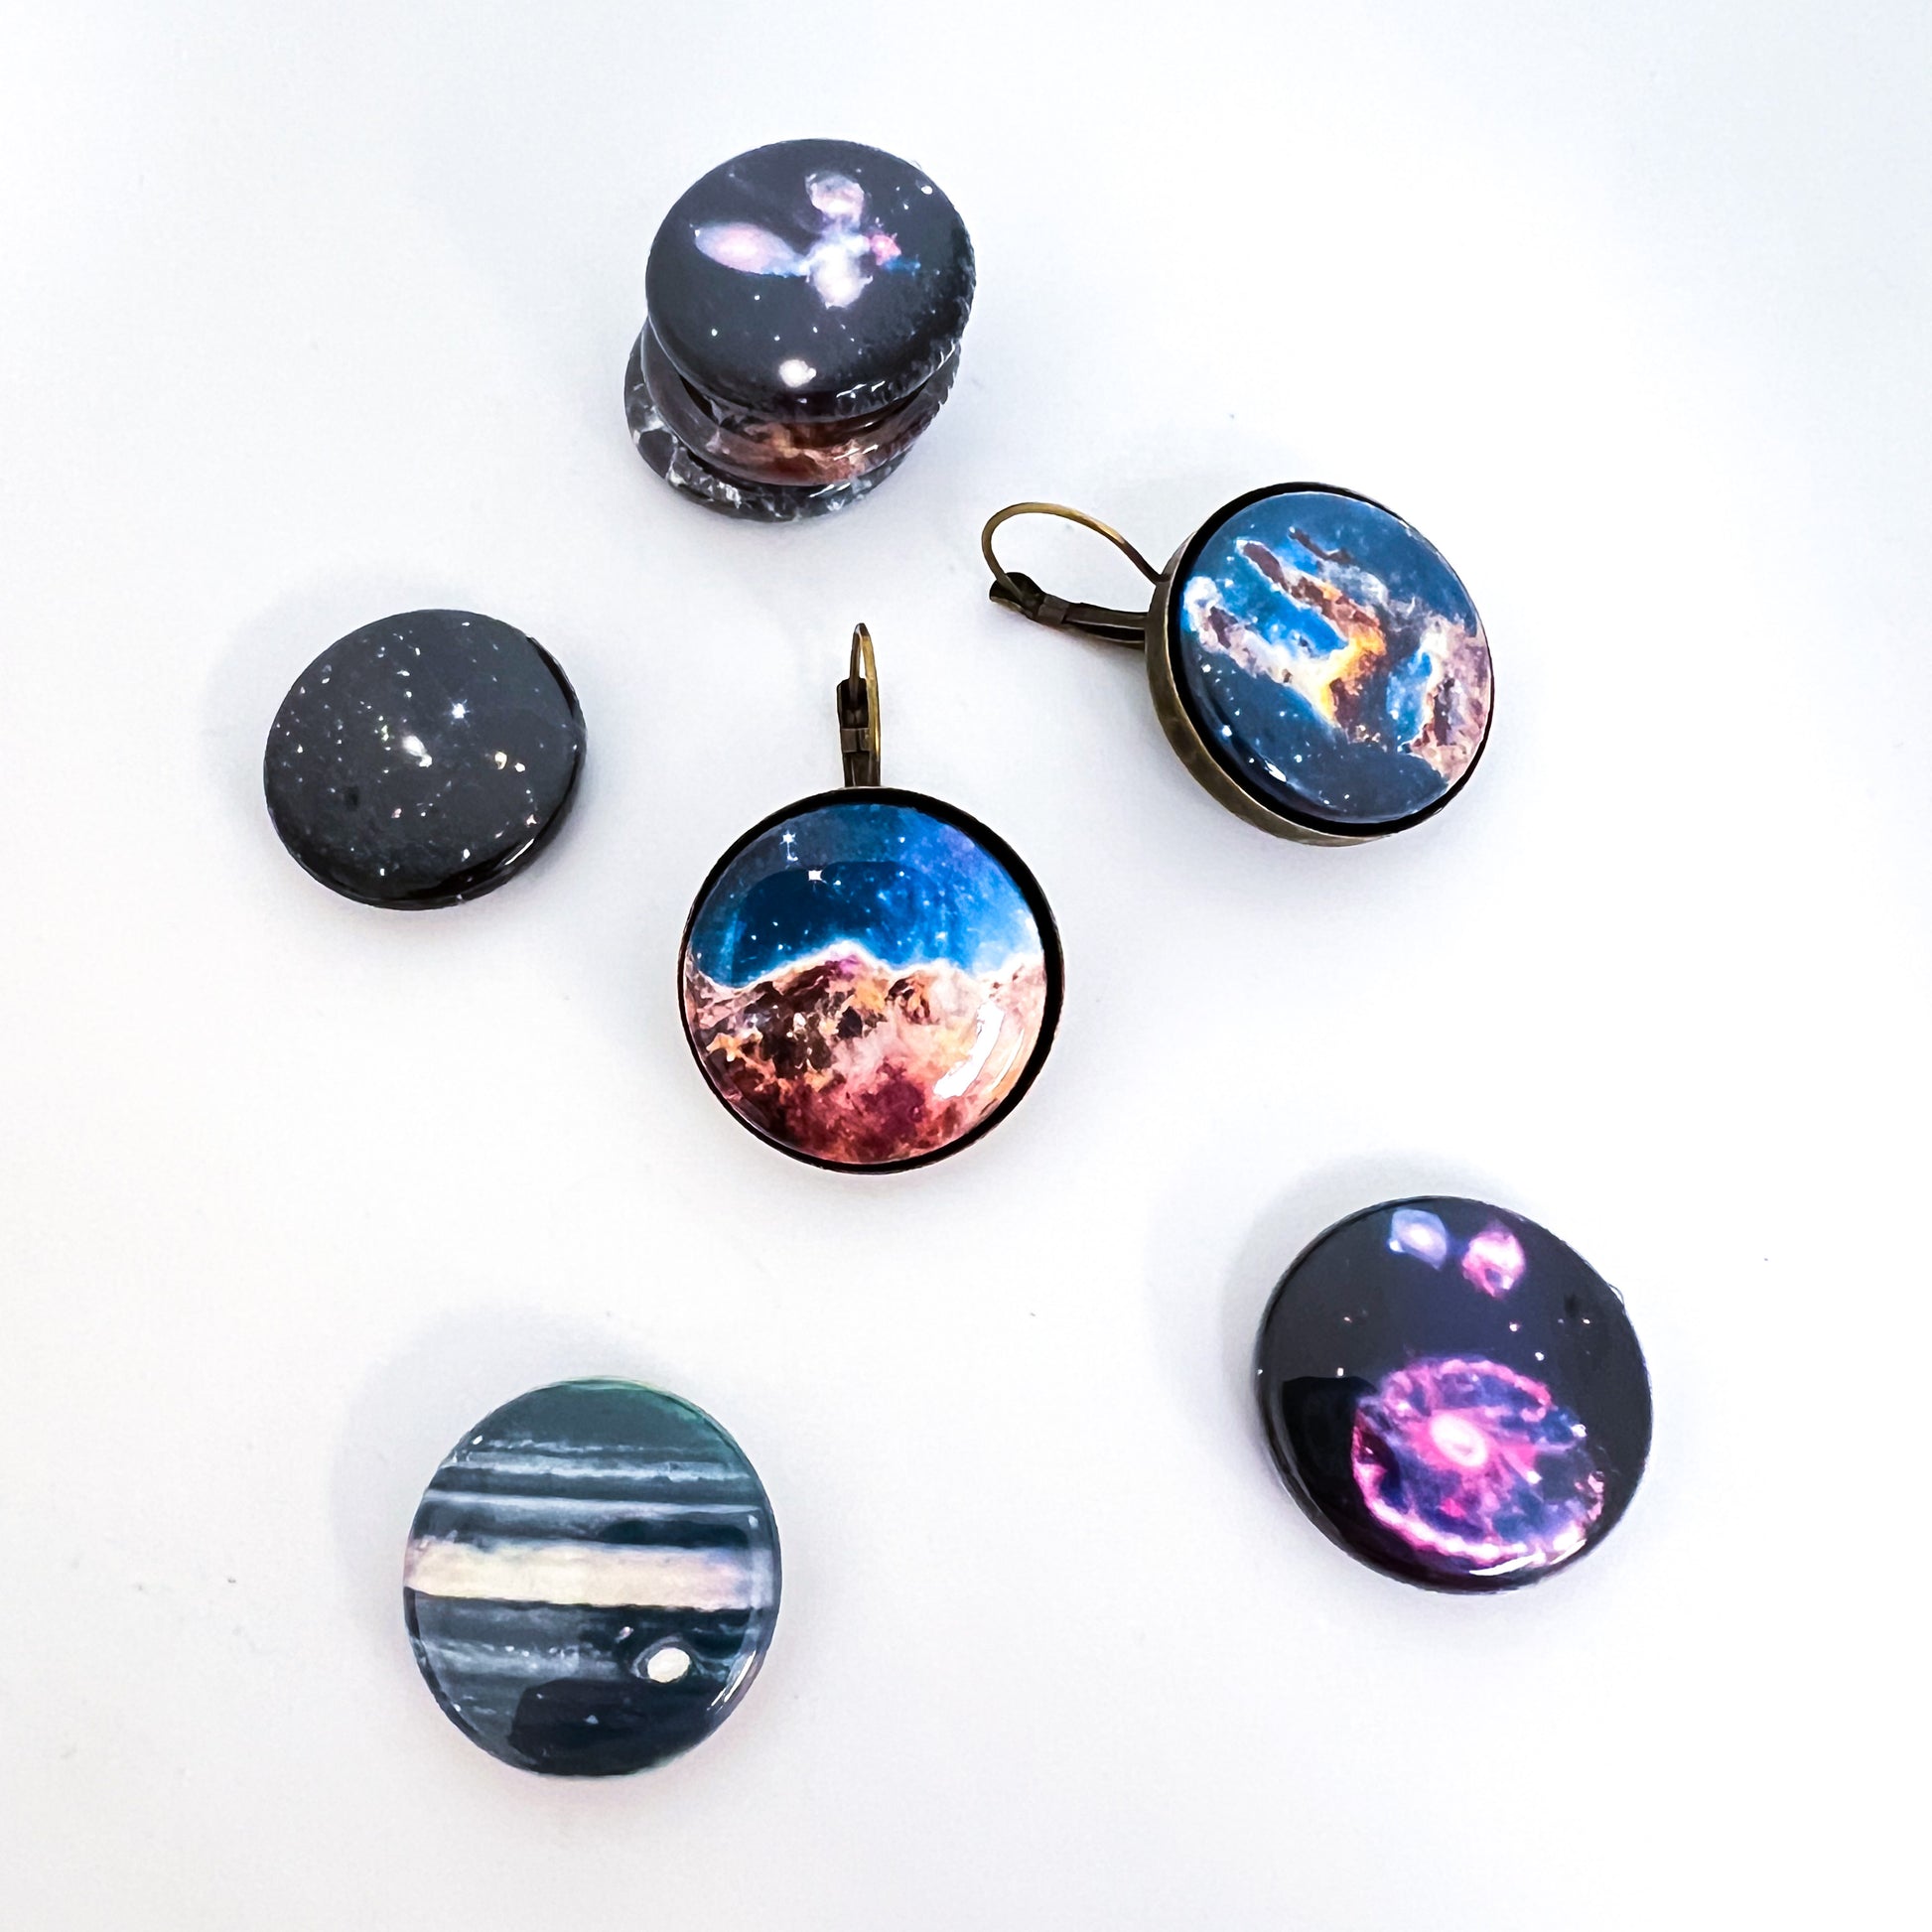 JWST First Images for Interchangeable Jewelry - Magnets Only!